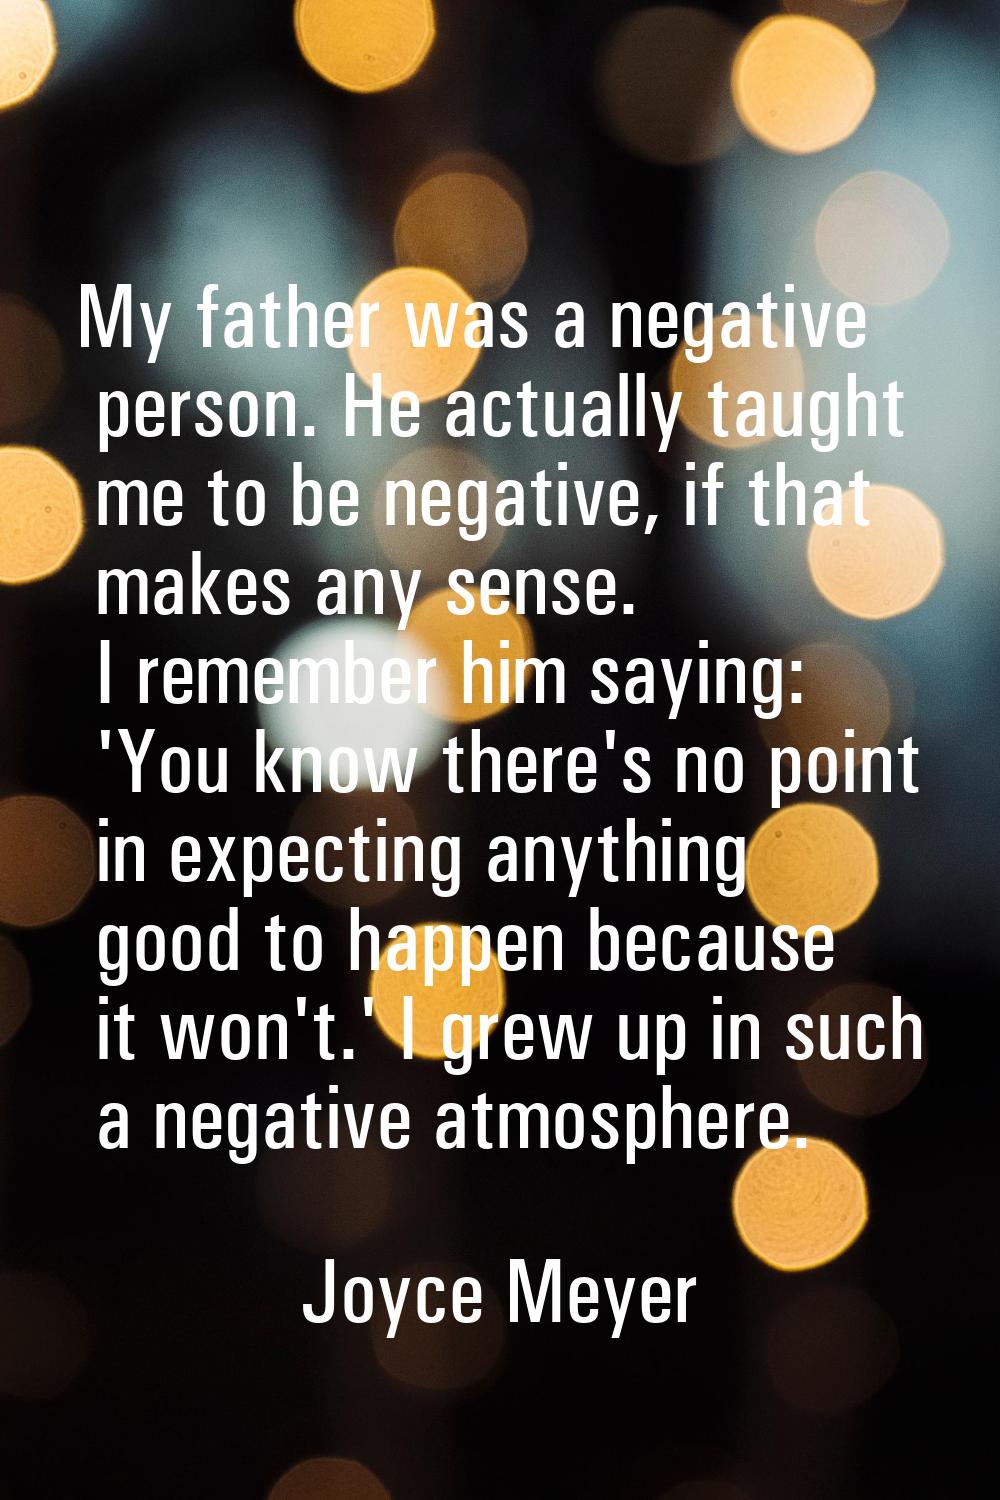 My father was a negative person. He actually taught me to be negative, if that makes any sense. I r